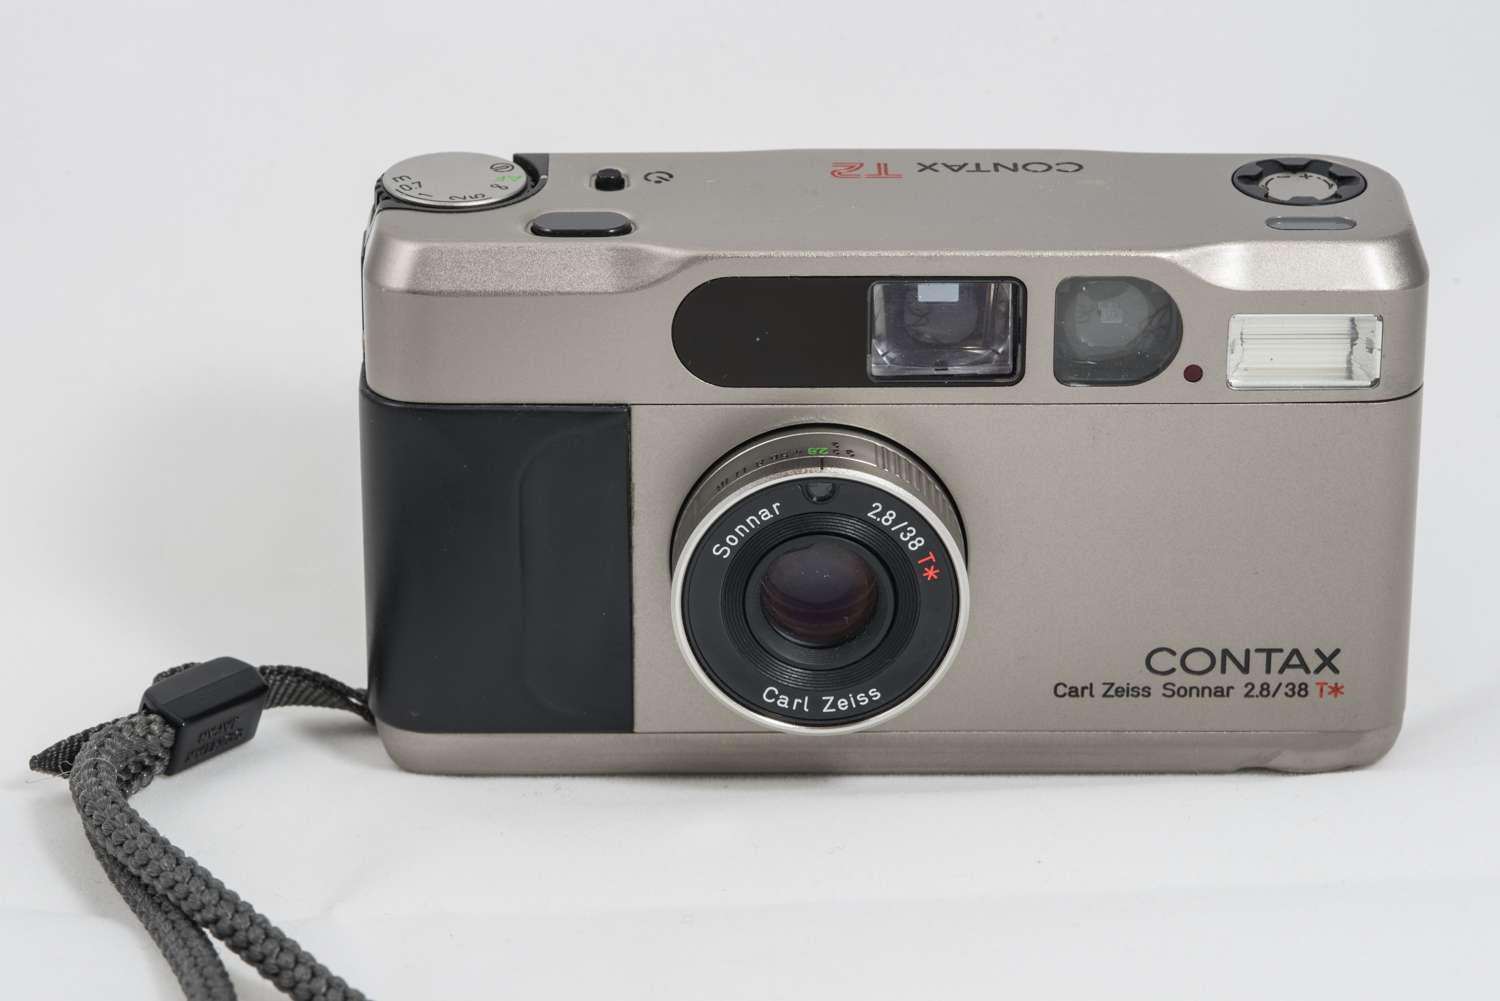 Rangefinder Chronicles: The Contax T2 - my favourite compact camera